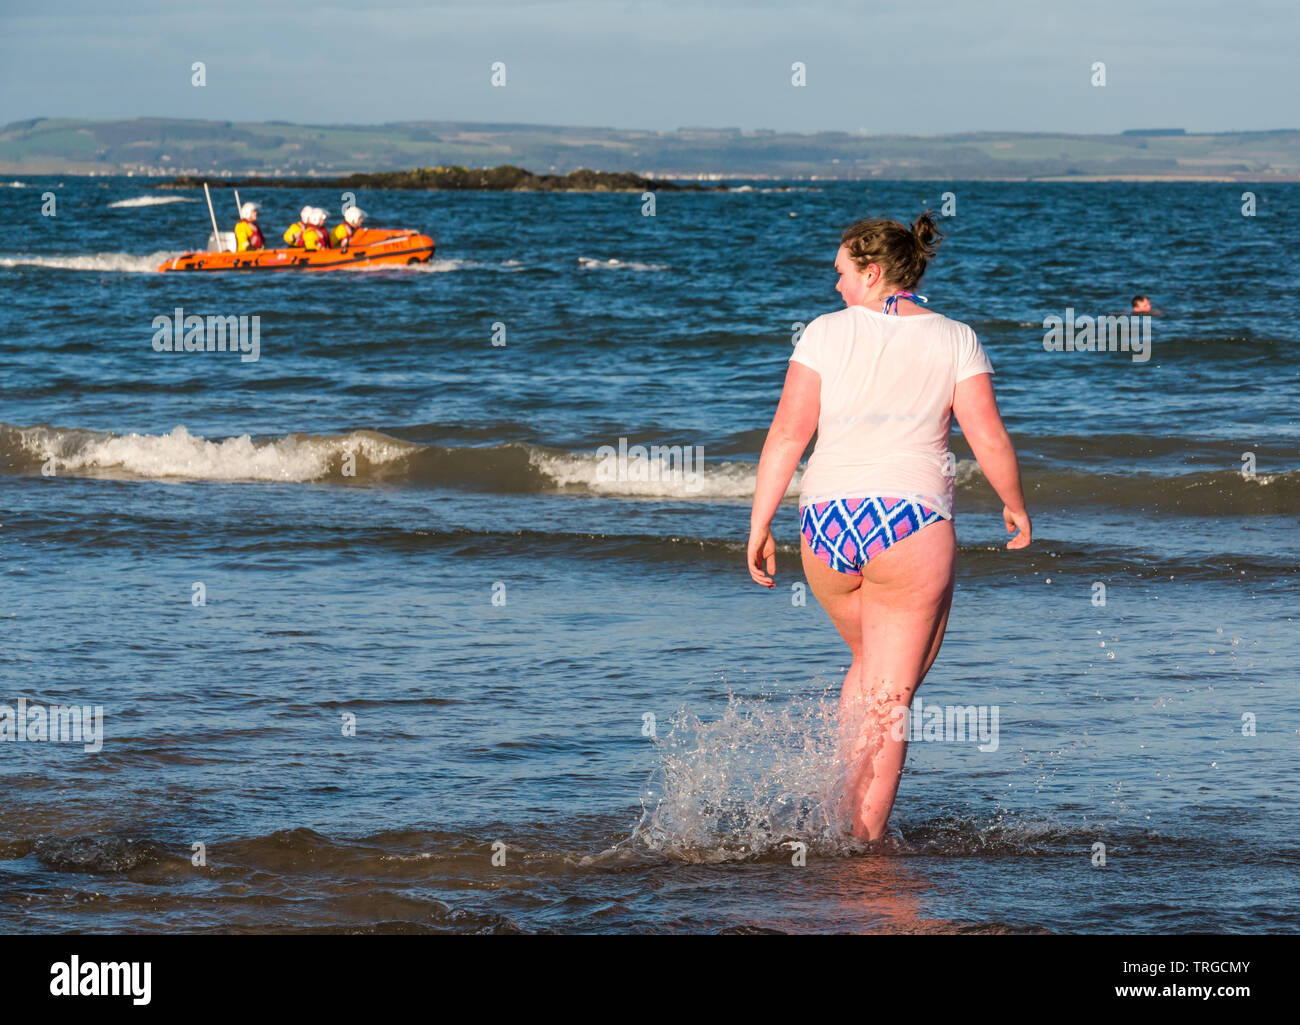 Loony Dook, New Year's Day: People brave cold water of West Bay, Firth of Forth, North Berwick, East Lothian, Scotland, UK. A woman goes into the sea Stock Photo